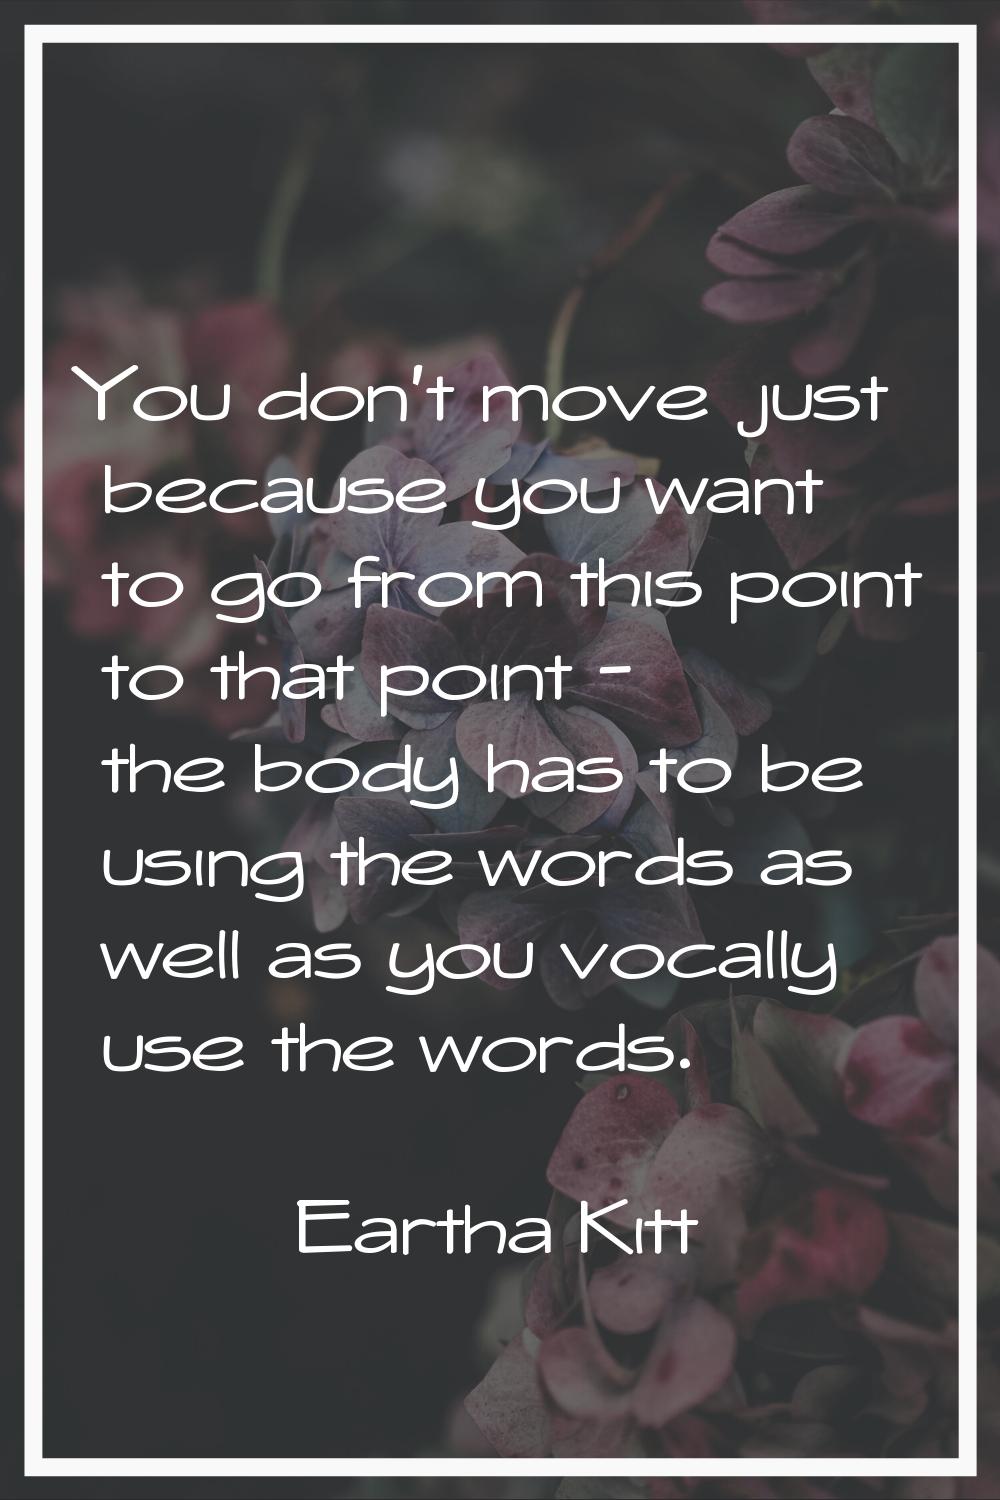 You don't move just because you want to go from this point to that point - the body has to be using